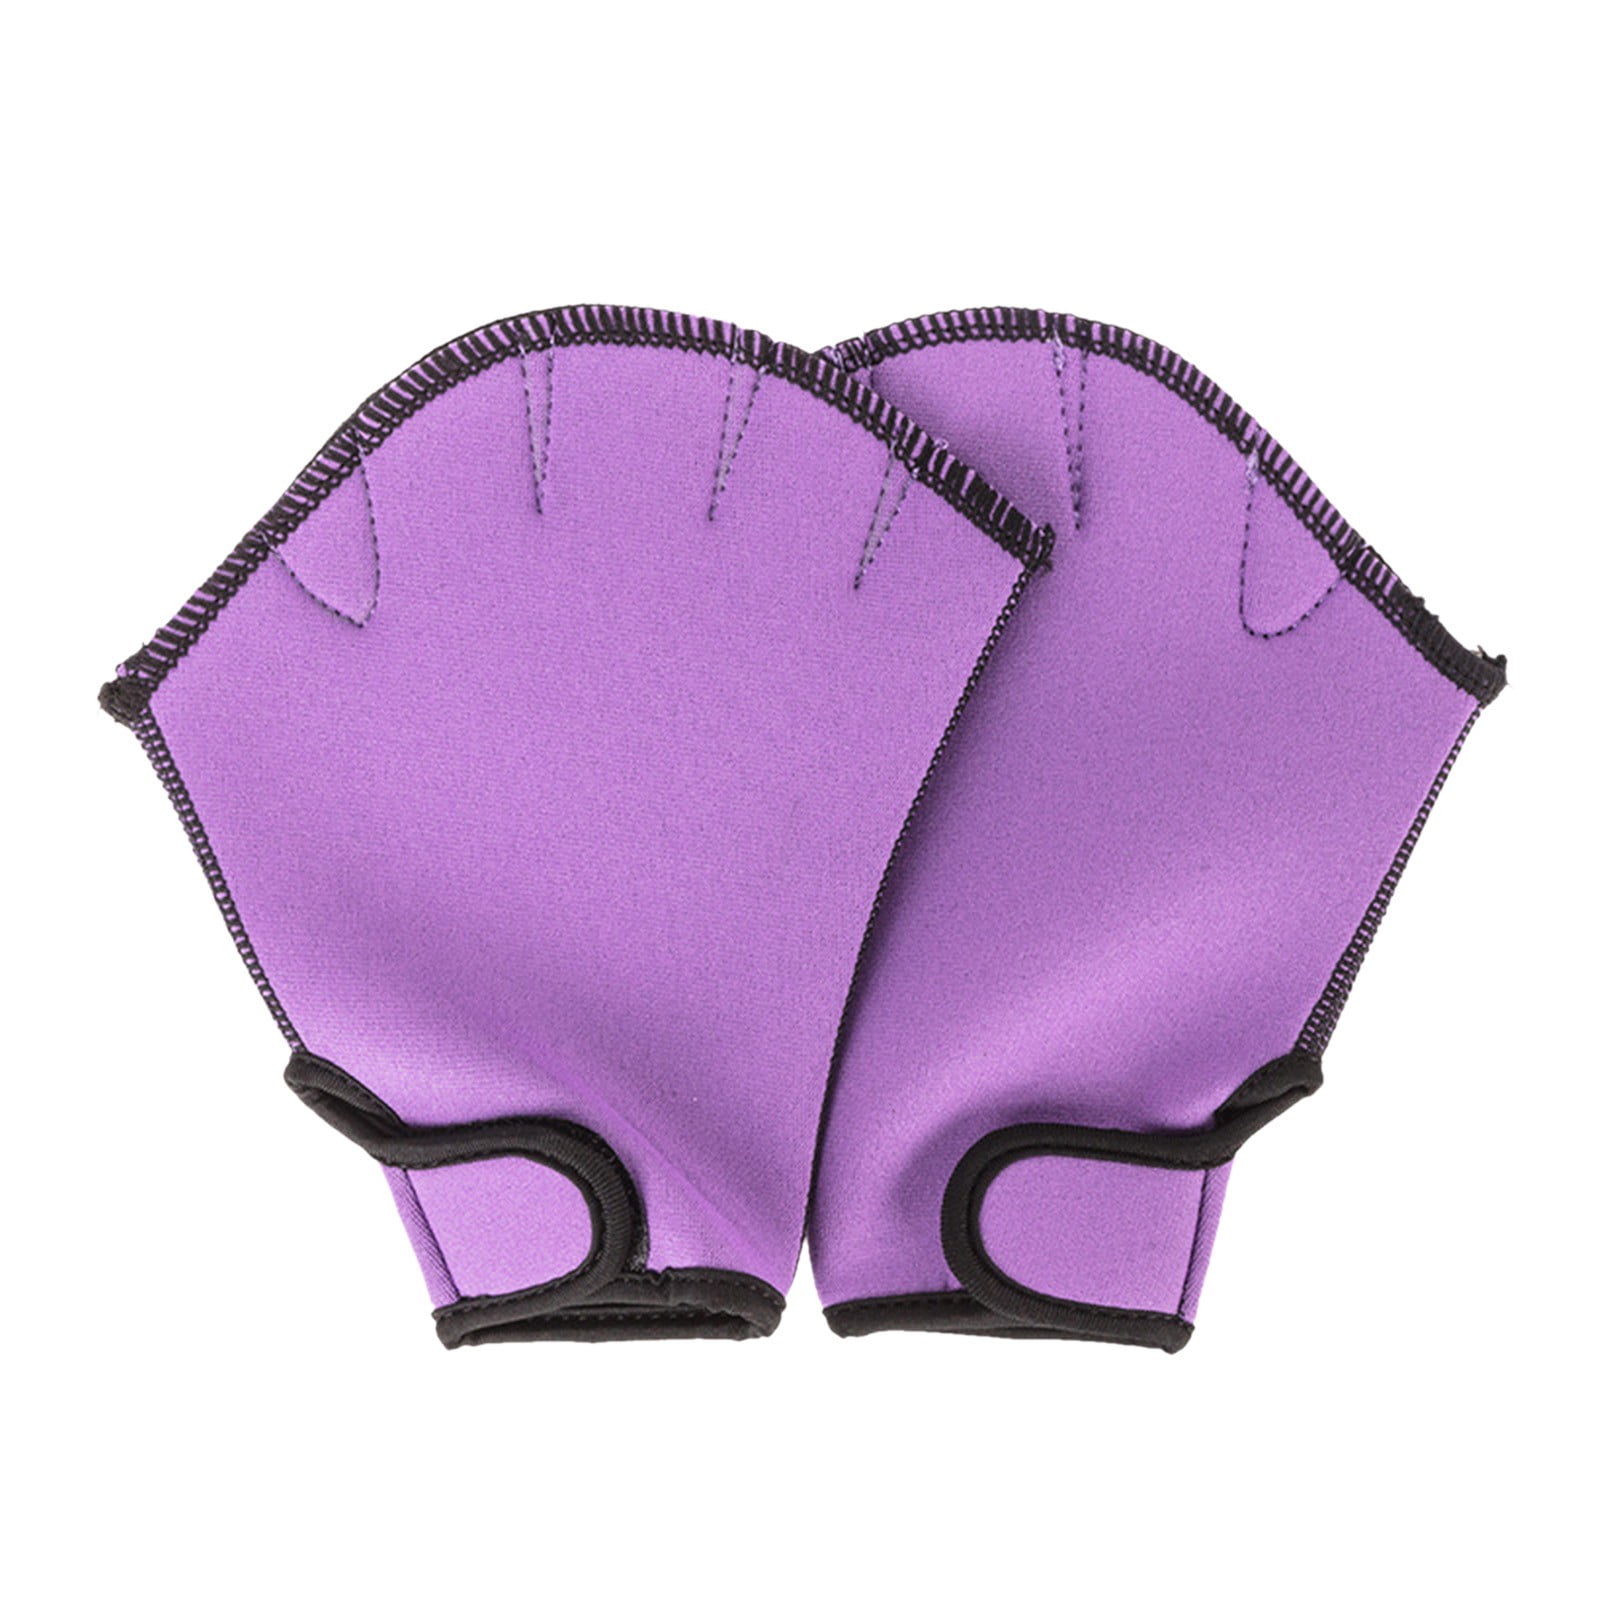 Details about   Swimming Hands Paddles Fins Webbed Glove Swim Surfing Training Aids W9Z4 